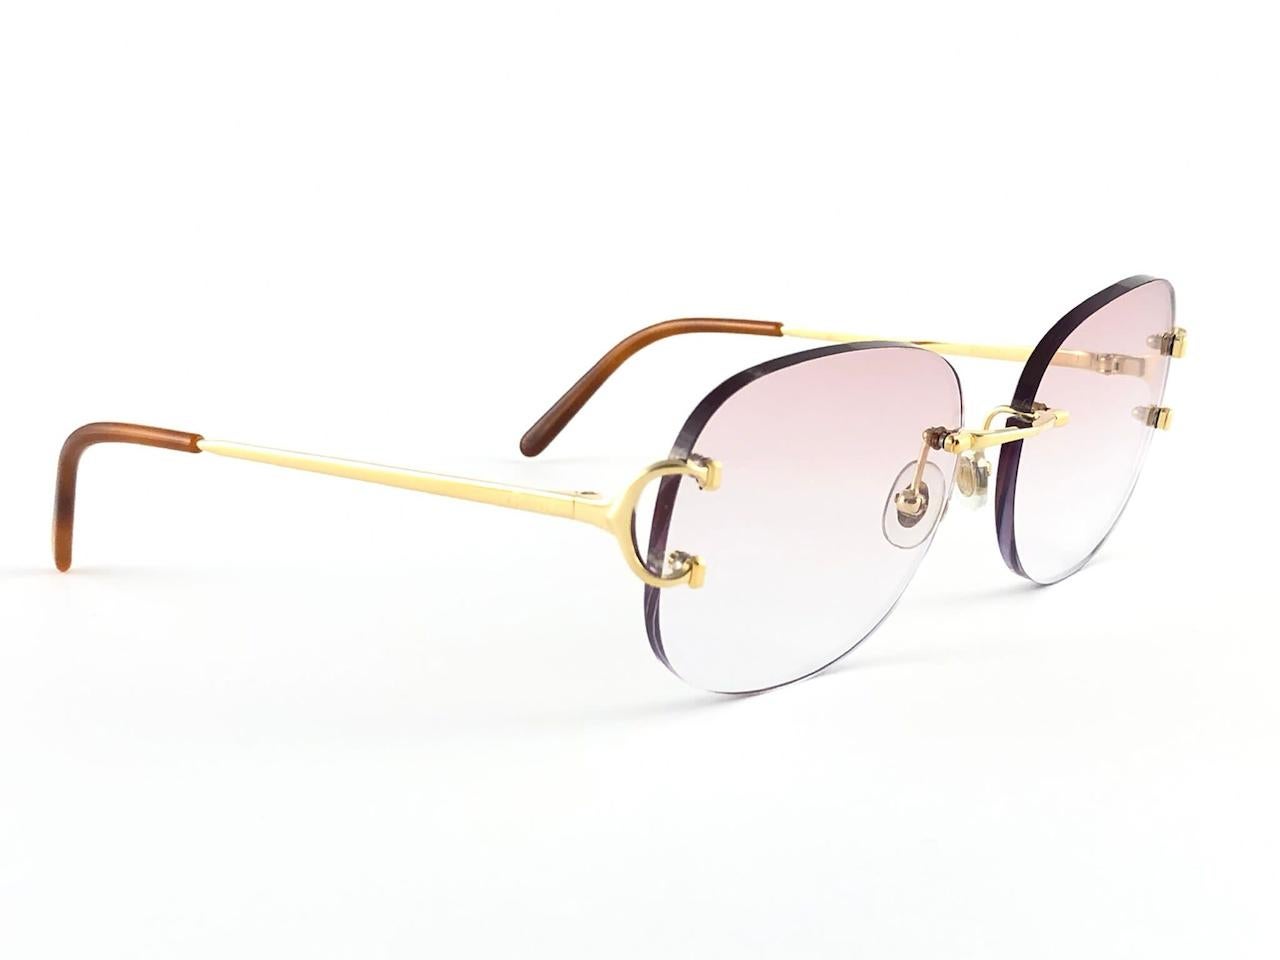 New 1990 Cartier gold plated unique rimless sunglasses with light rose gradient  (uv protection) lenses. Frame with the front and sides in gold. All hallmarks. 

Cartier signs on the black ear paddles. 

Please notice this item its nearly 30 years